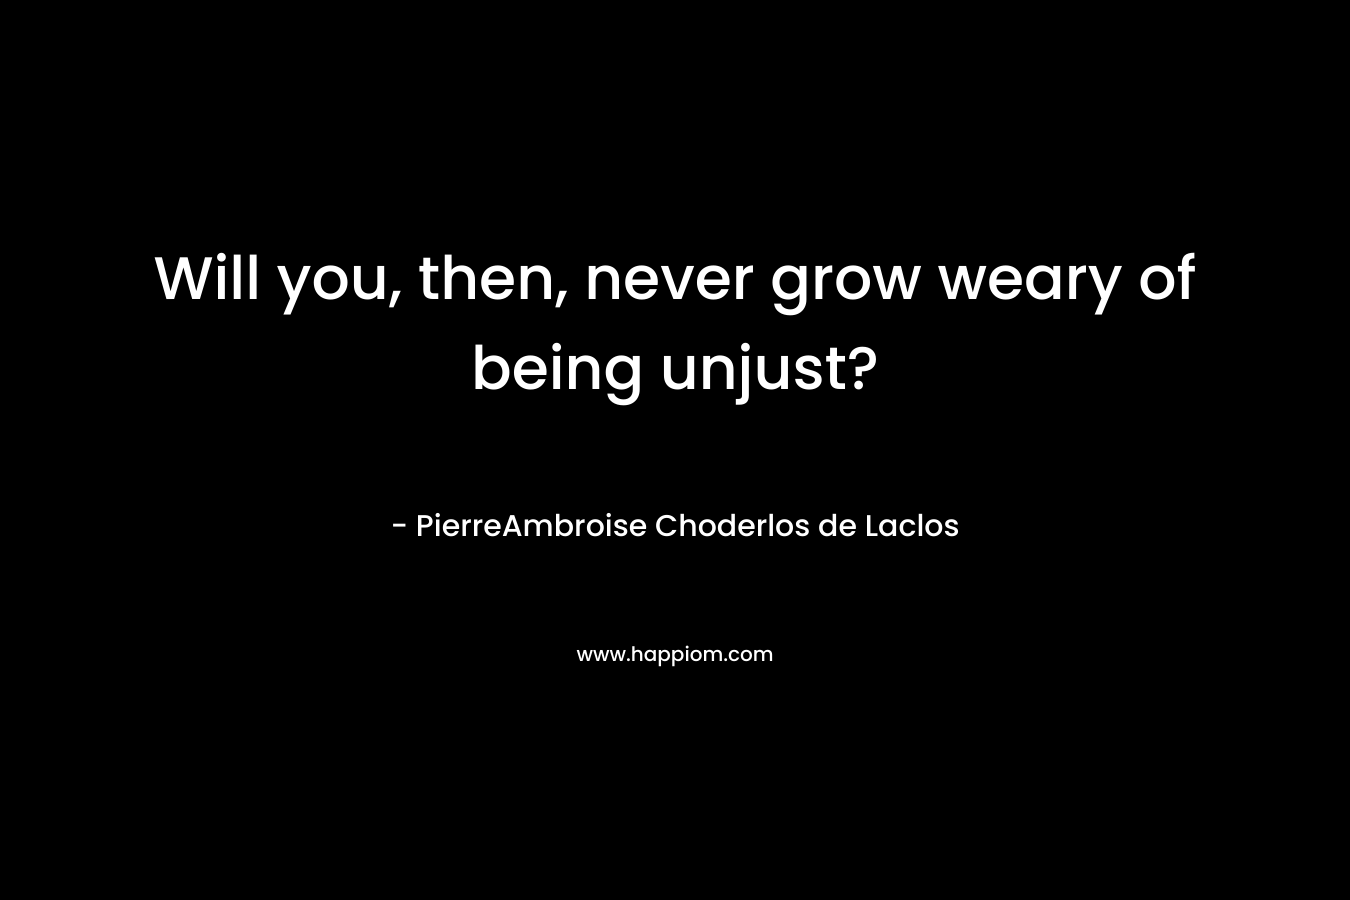 Will you, then, never grow weary of being unjust? – PierreAmbroise Choderlos de Laclos